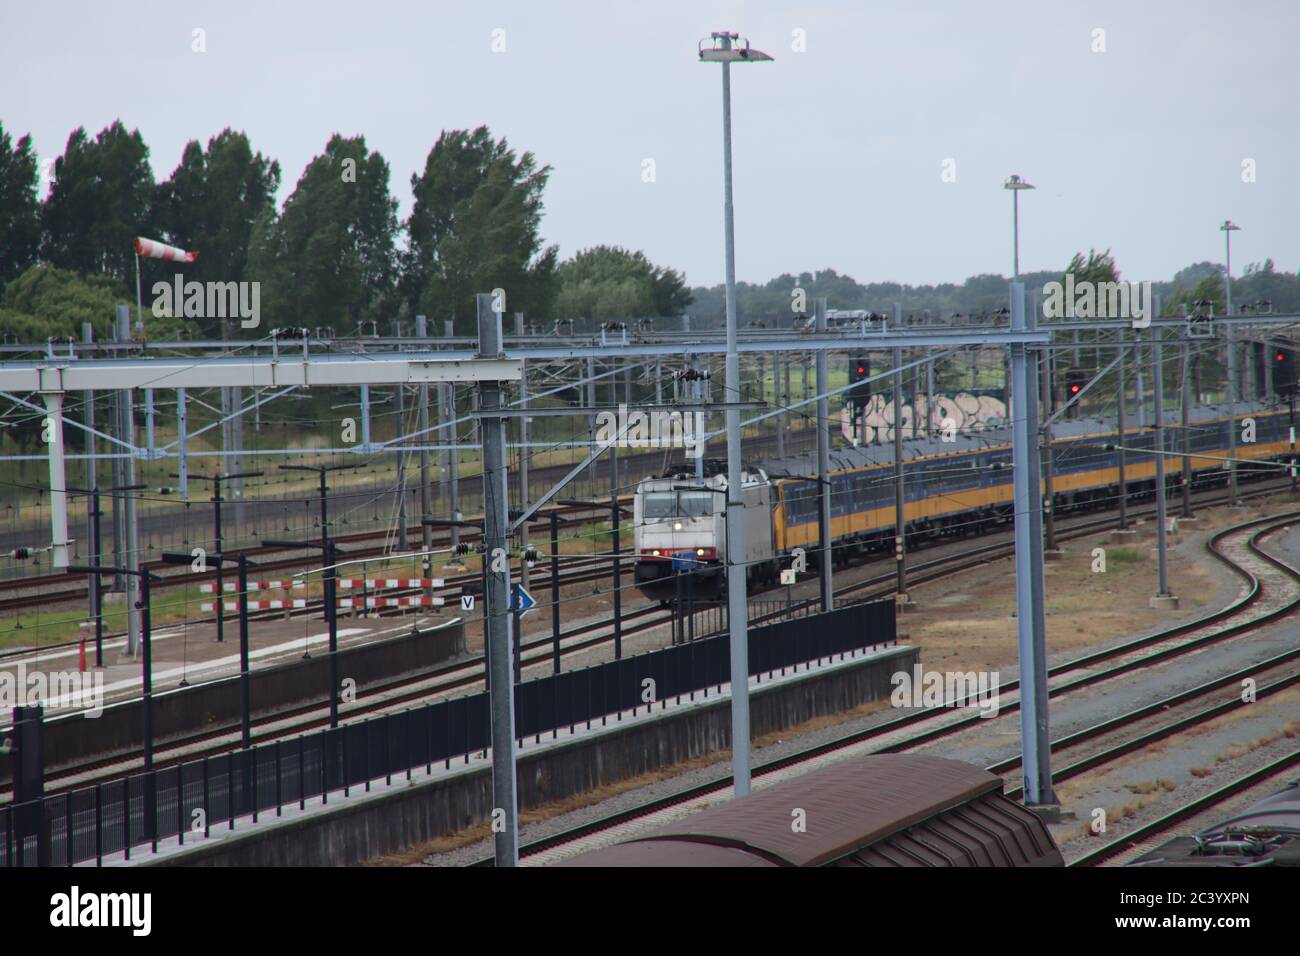 Intercity direct rushes along platform at poor train station Lage Zwaluwe in the Netherlands Stock Photo